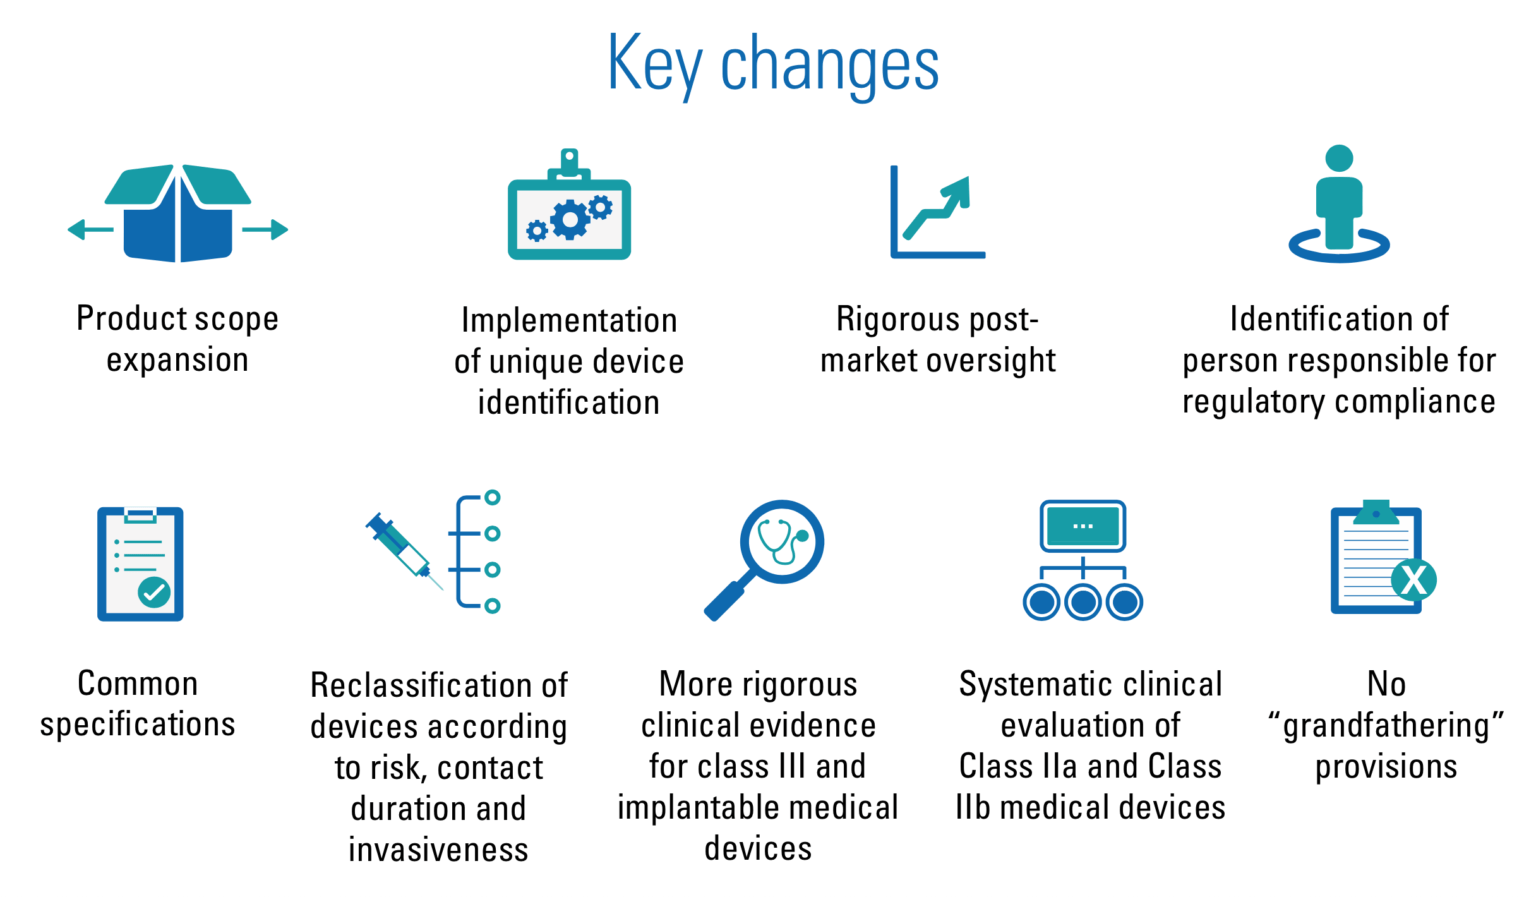 Key changes between MDD and MDR illustrated